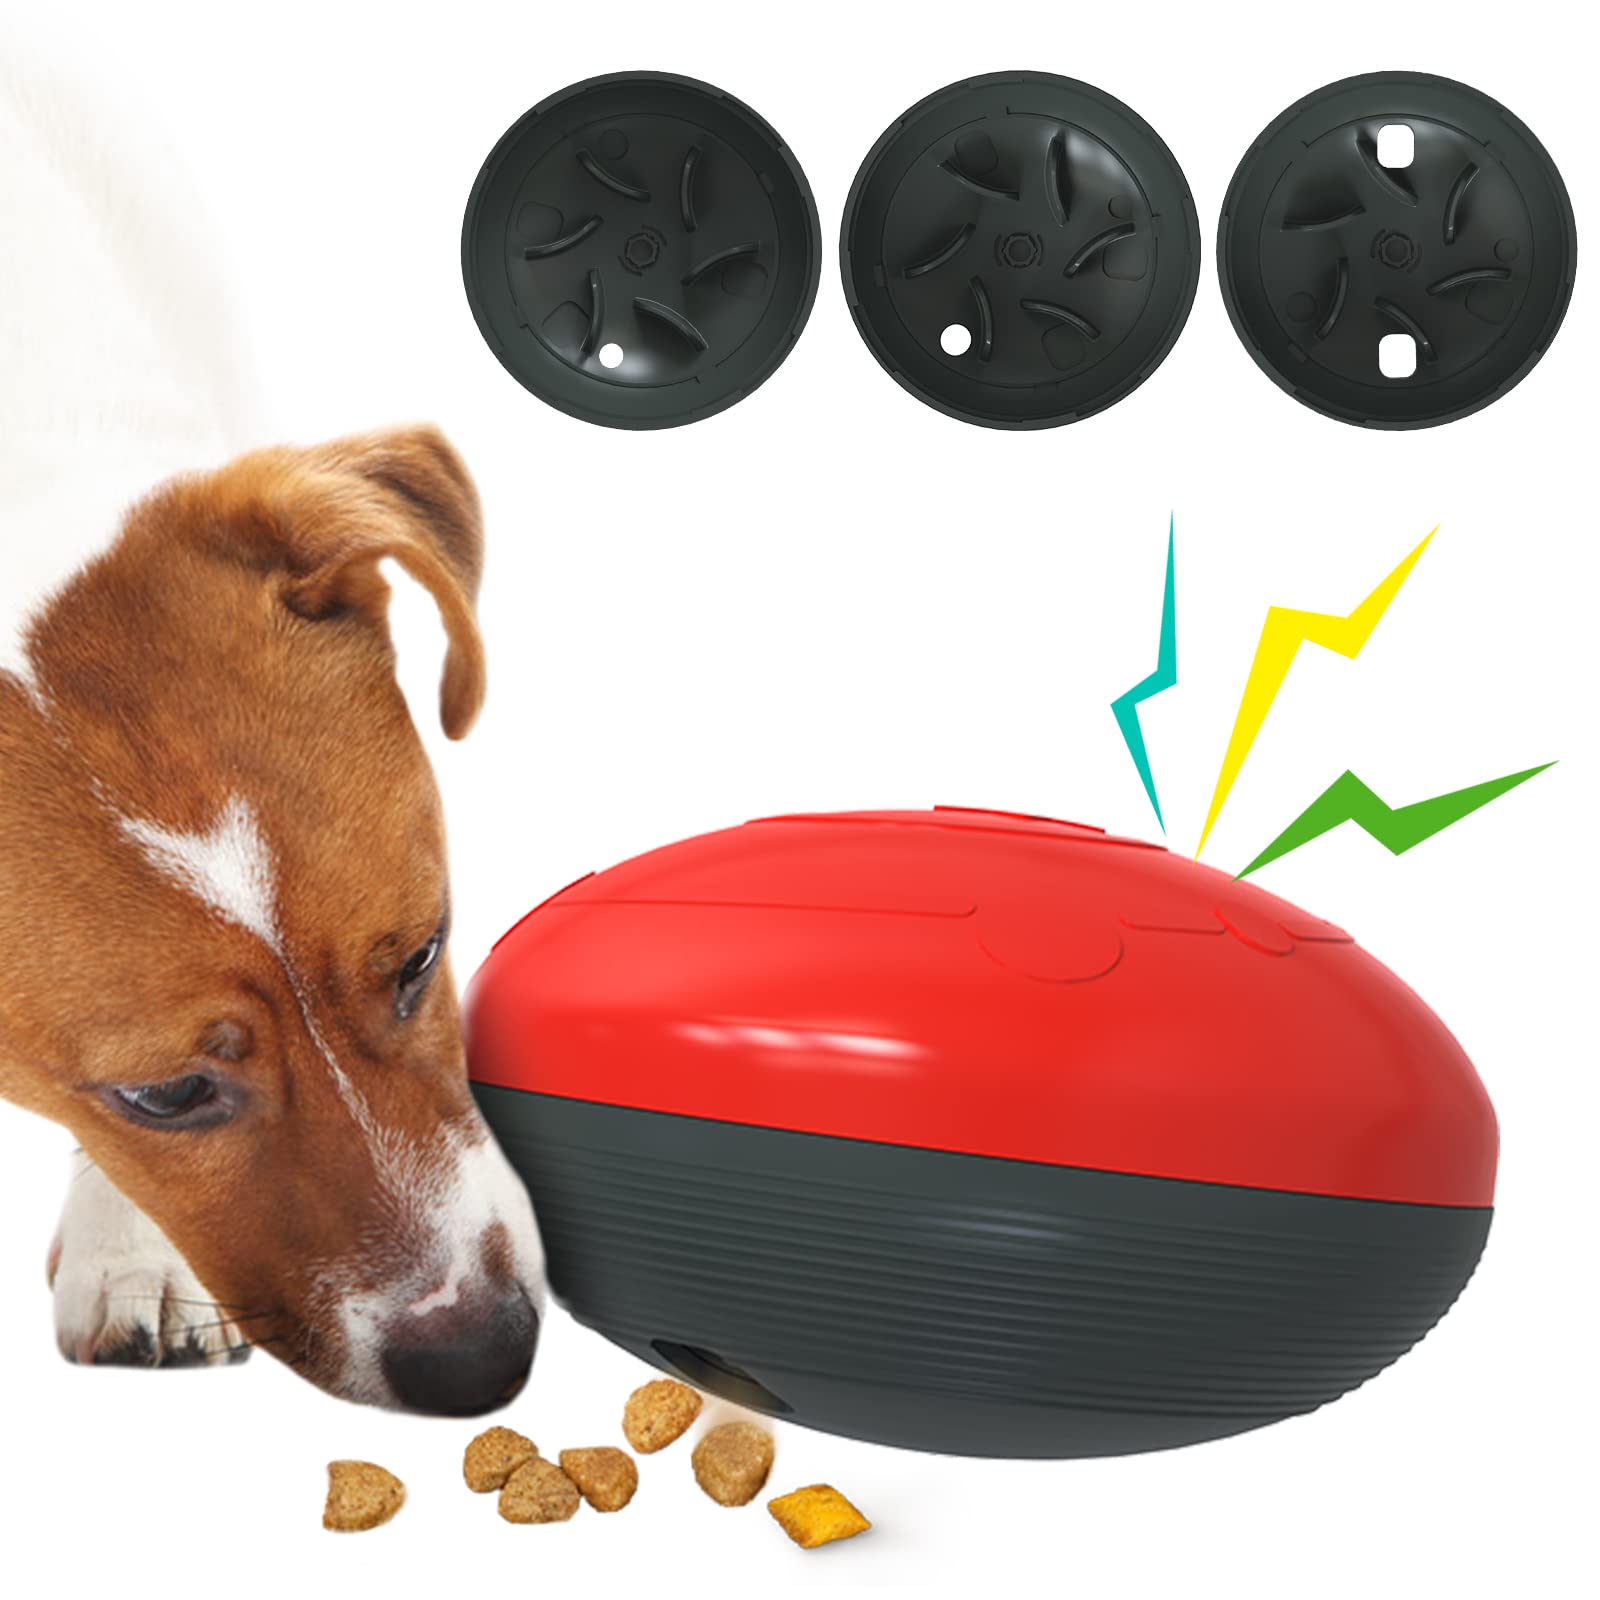 KADTC Dog Adjustable Food Dispensing Treat Dispenser Dogs Puzzle Toys Feeder Squeaky Puppy Chew Feeding Interactive Indoor Ball for Small Chewers Gift